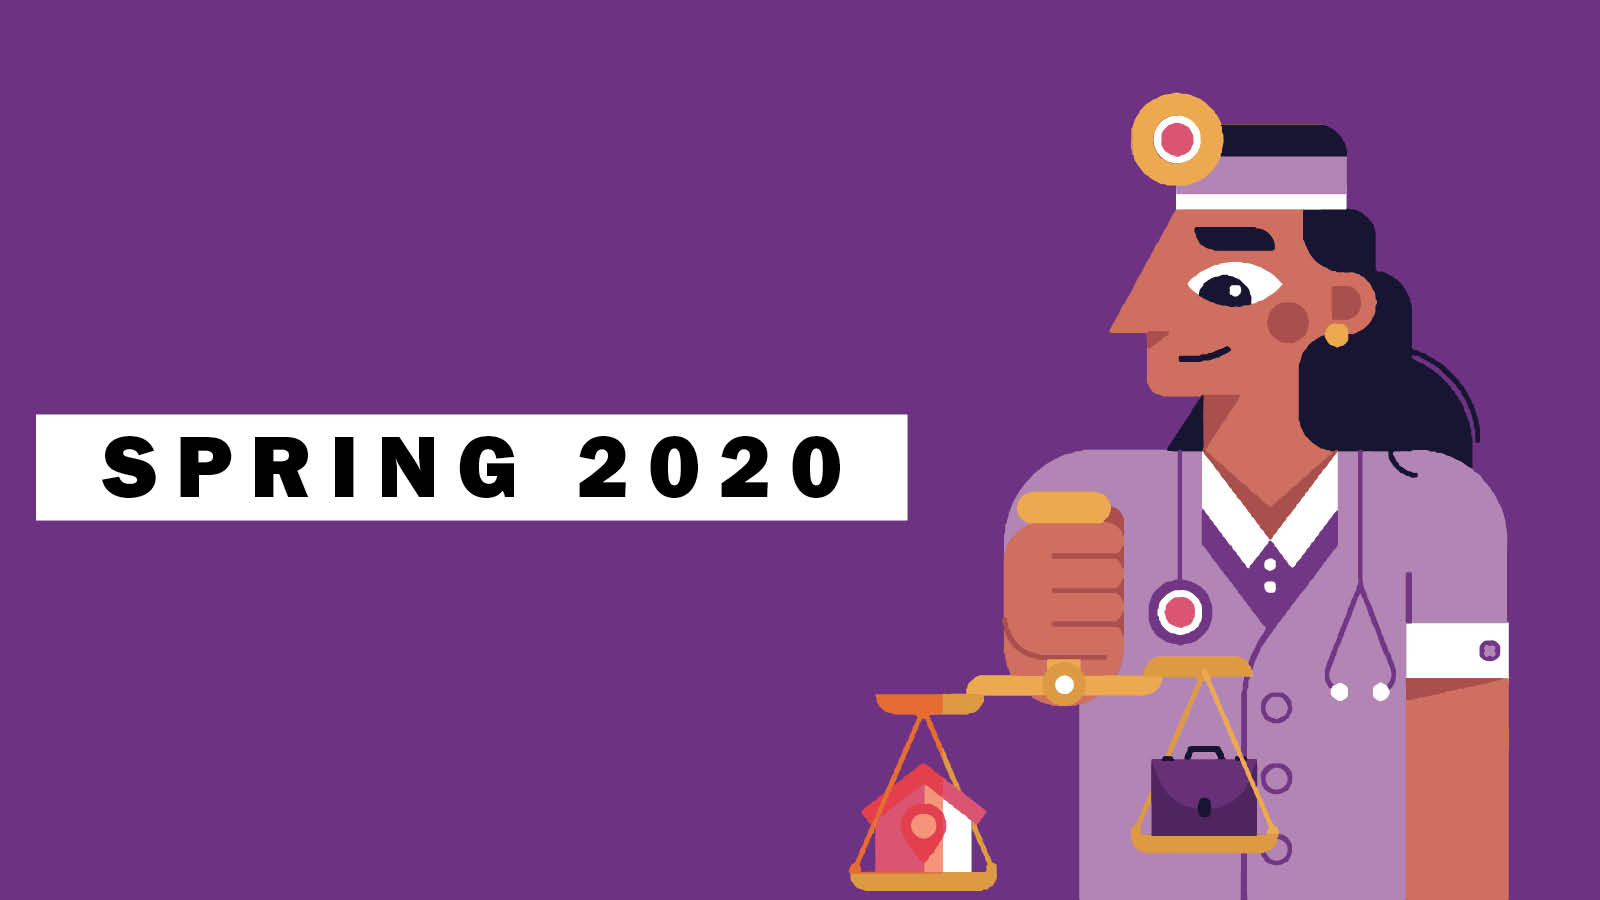 See which specialties were the hardest to recruit and in highest demand for Spring 2020